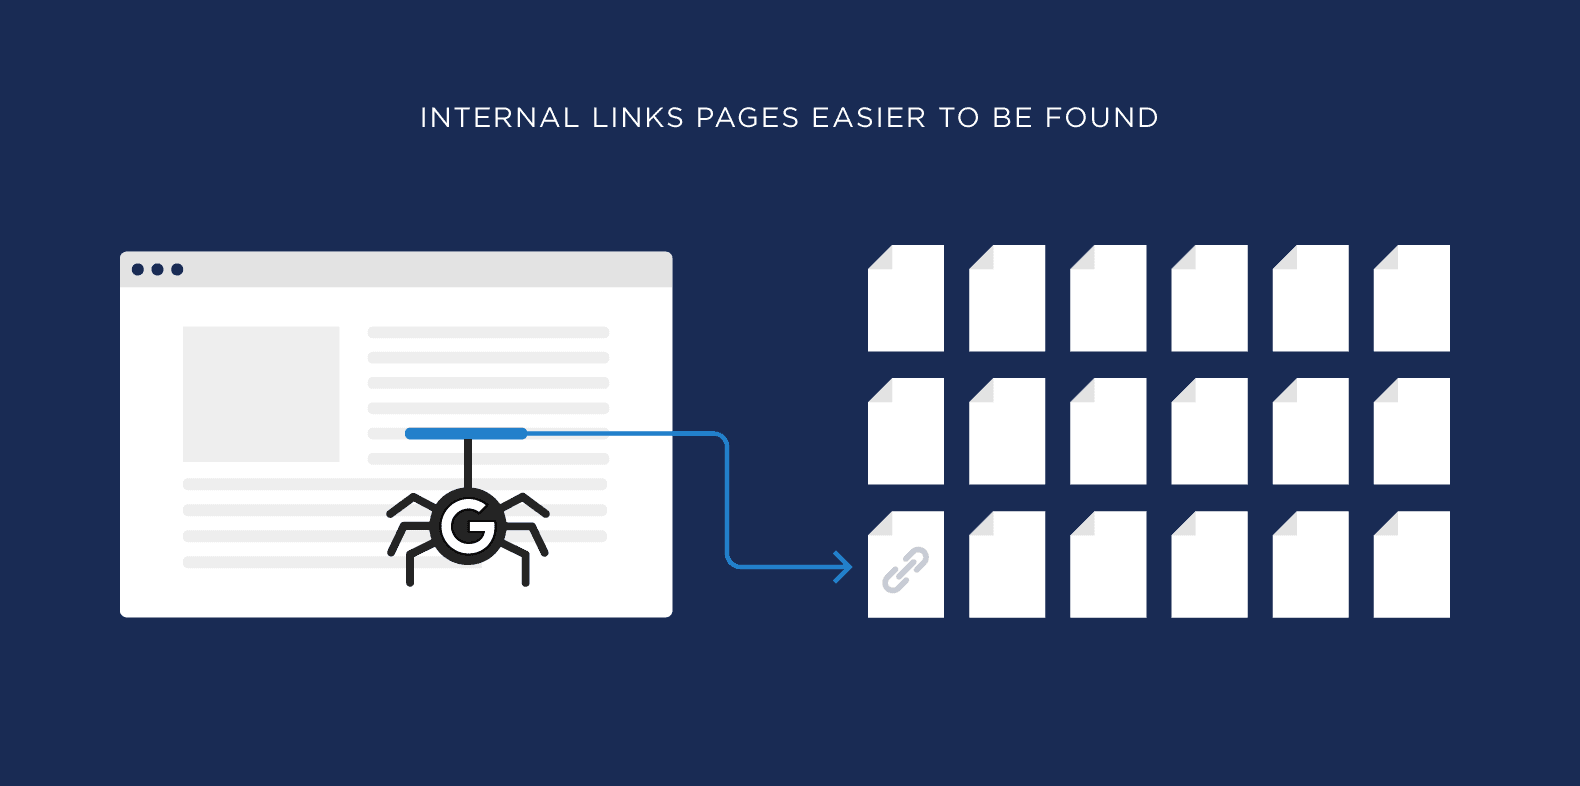 Internal links make pages easier to be found